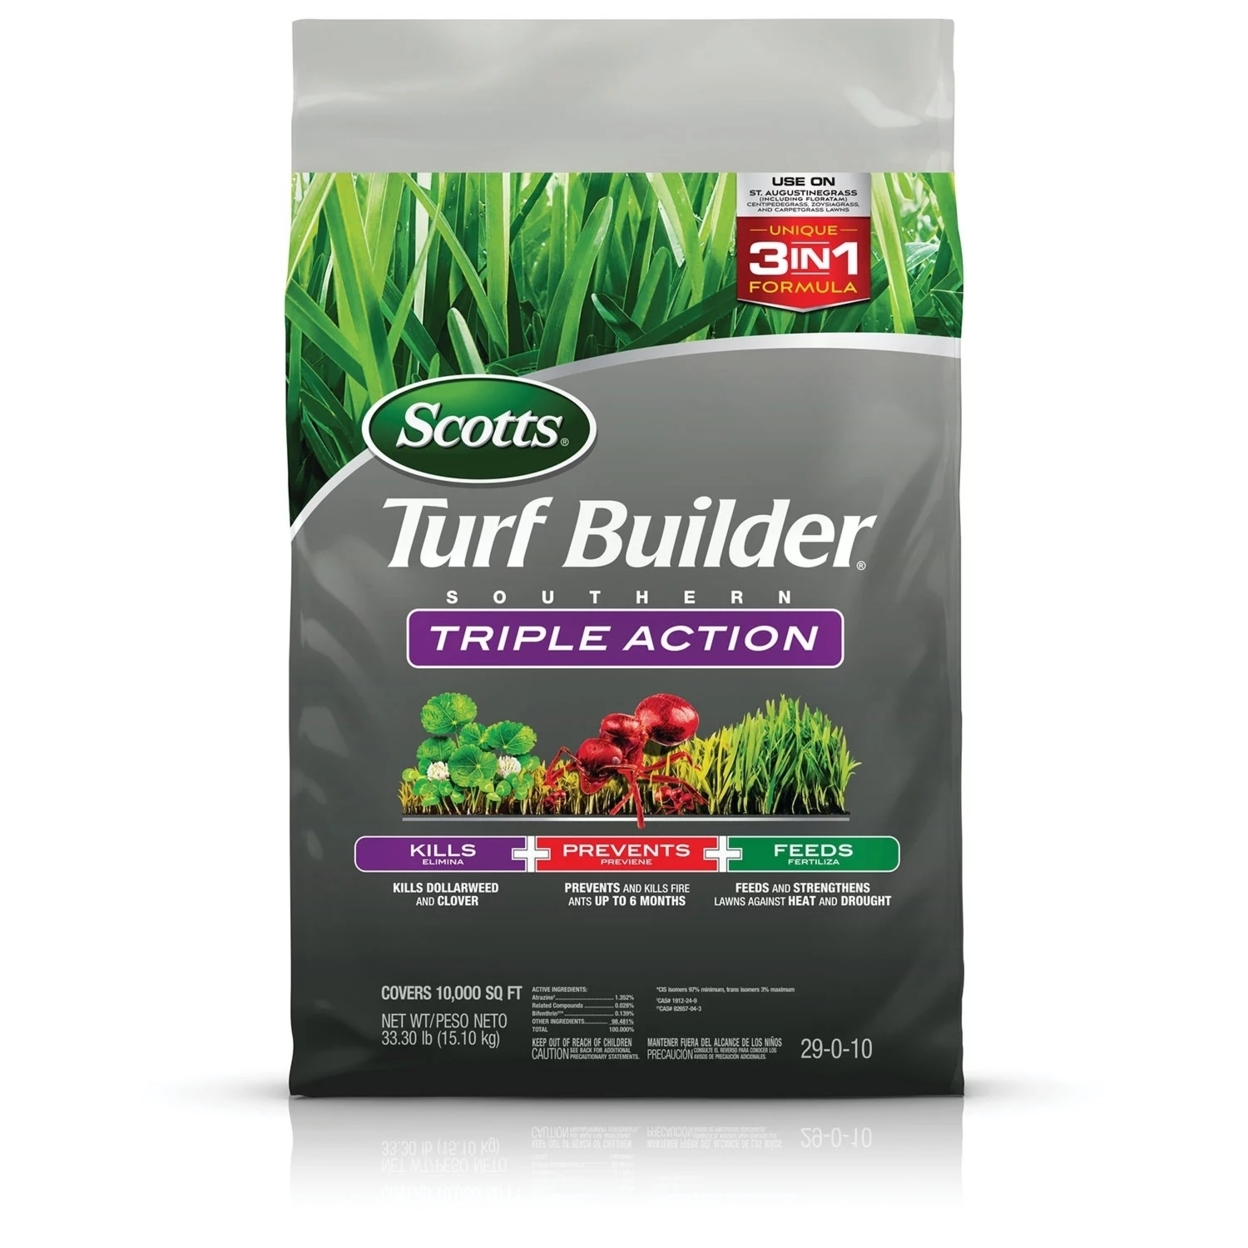 Scotts Turf Builder Southern Triple Action, 33.3 Pounds